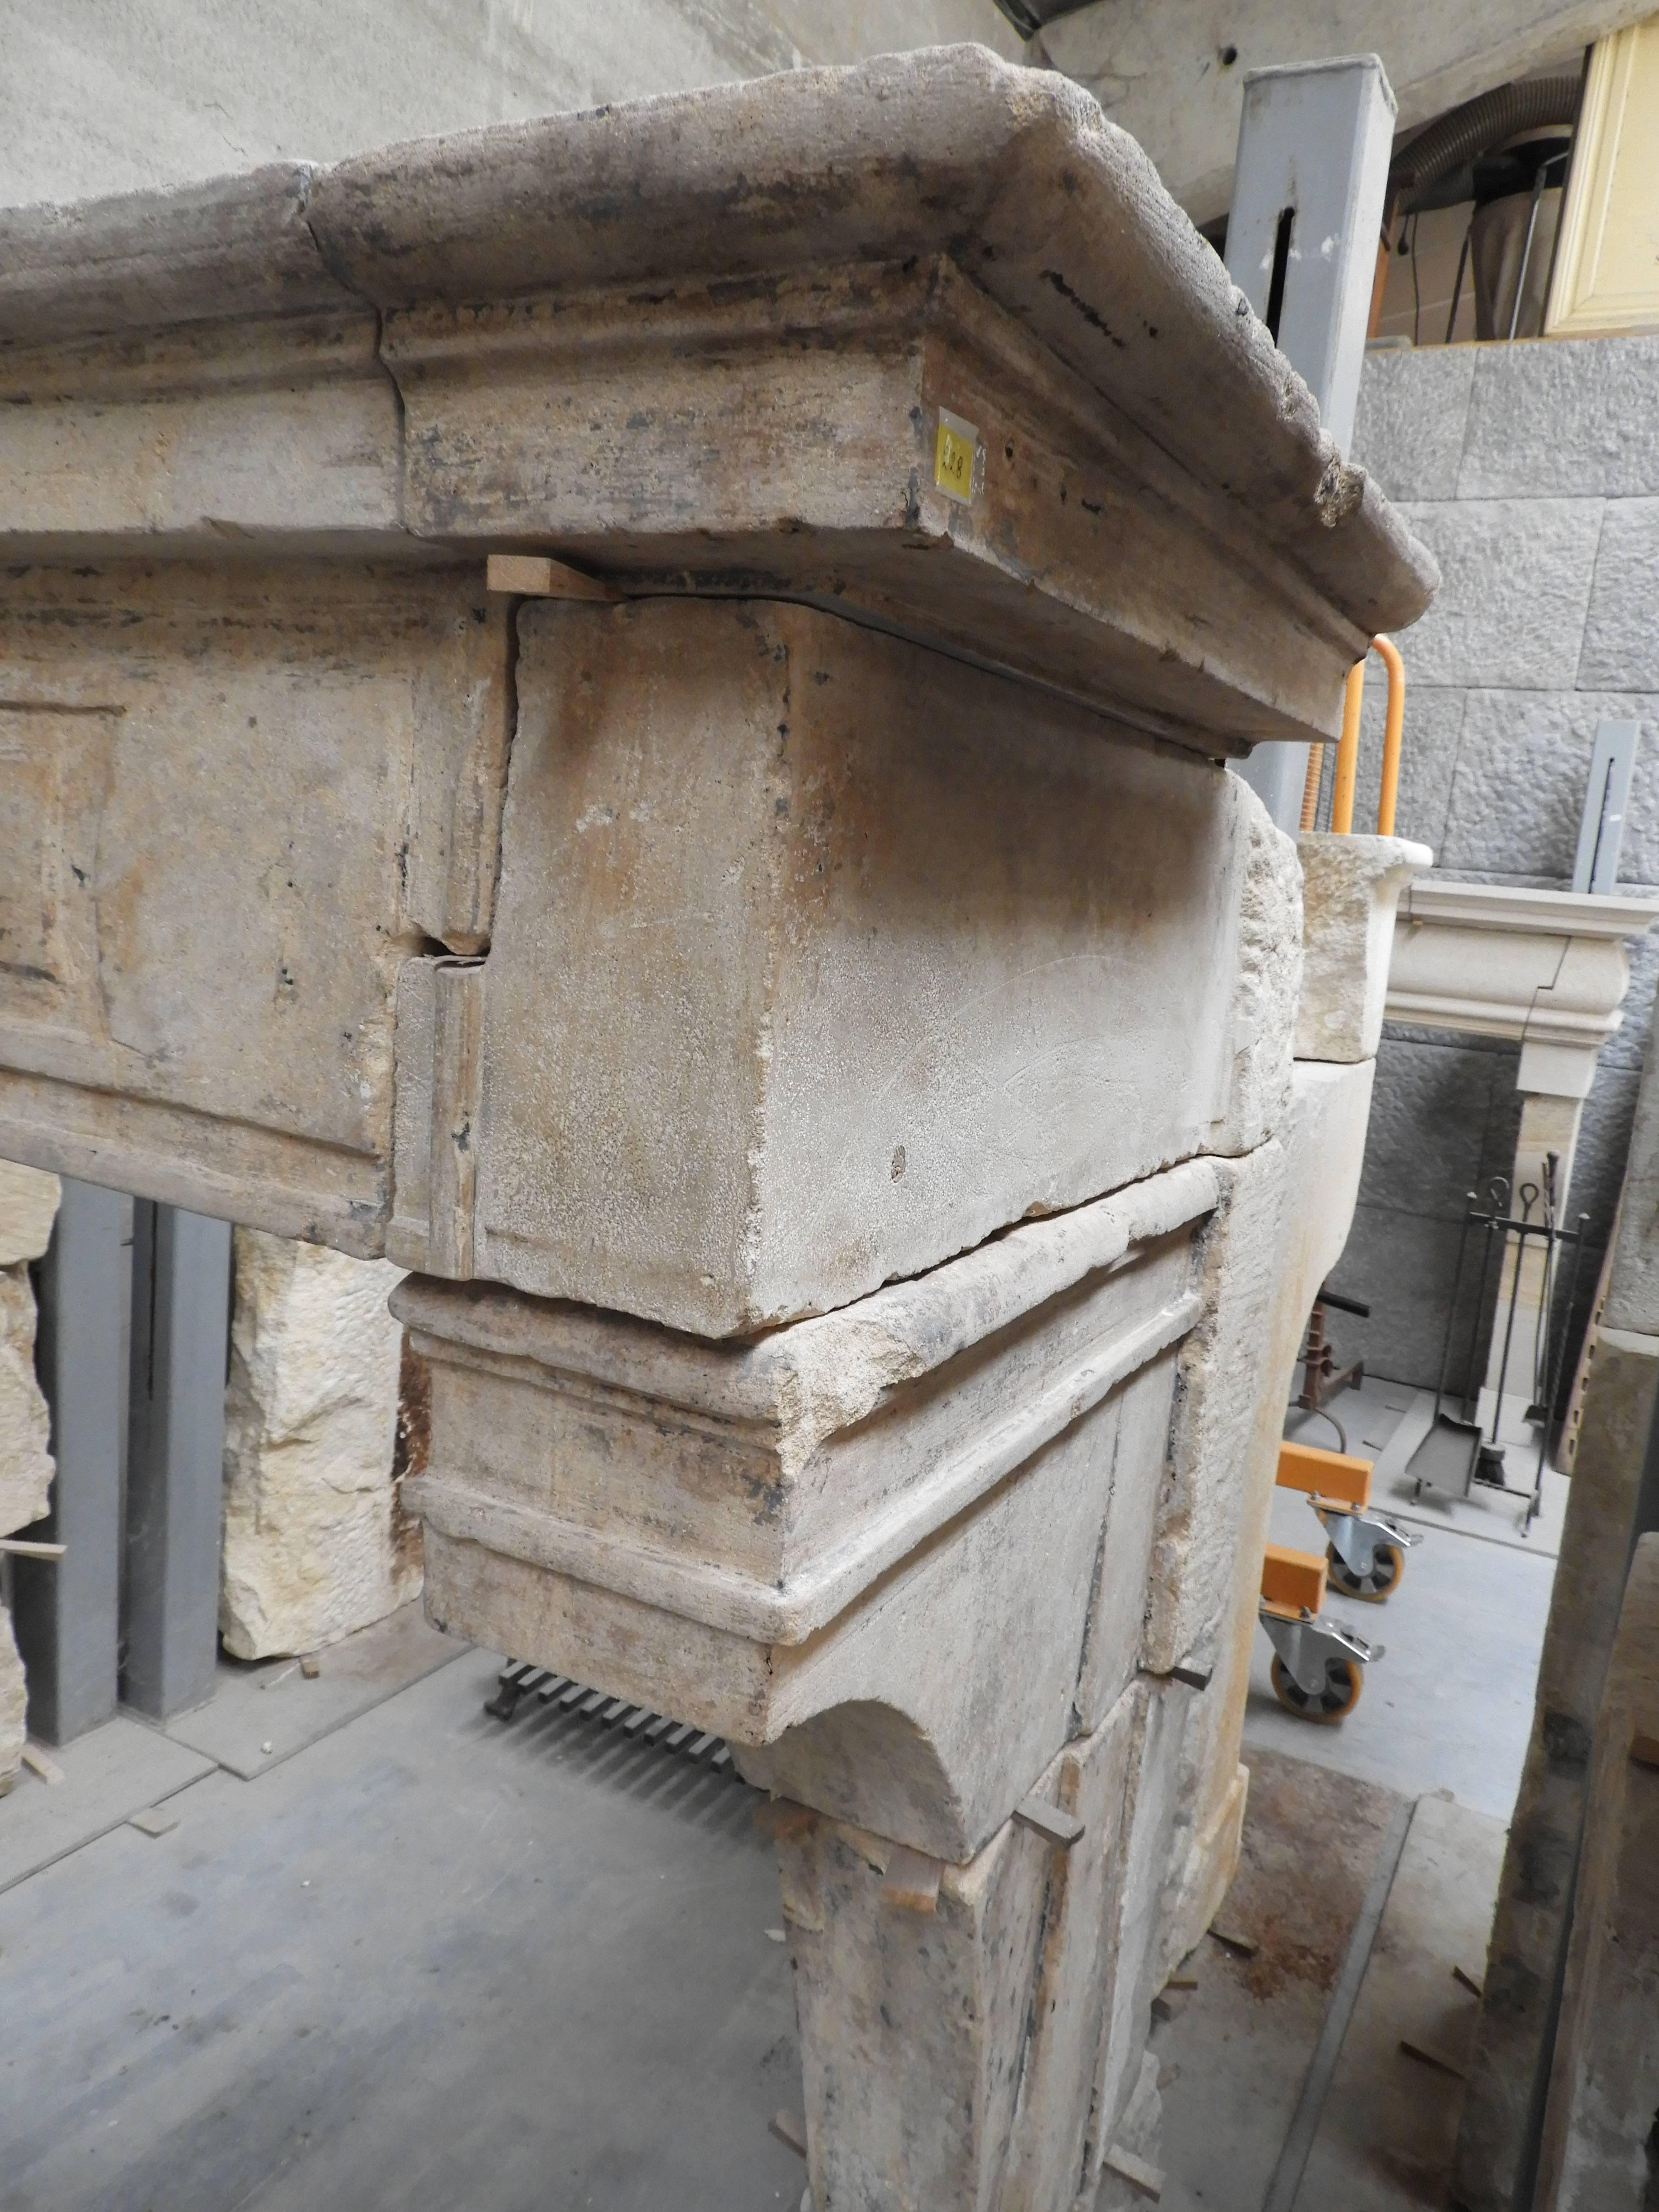 18th century French limestone fireplace, from the city of Nancy, it has a lot of character and a nice rustic patina, the fireplace is fully restored respecting it's original patina.